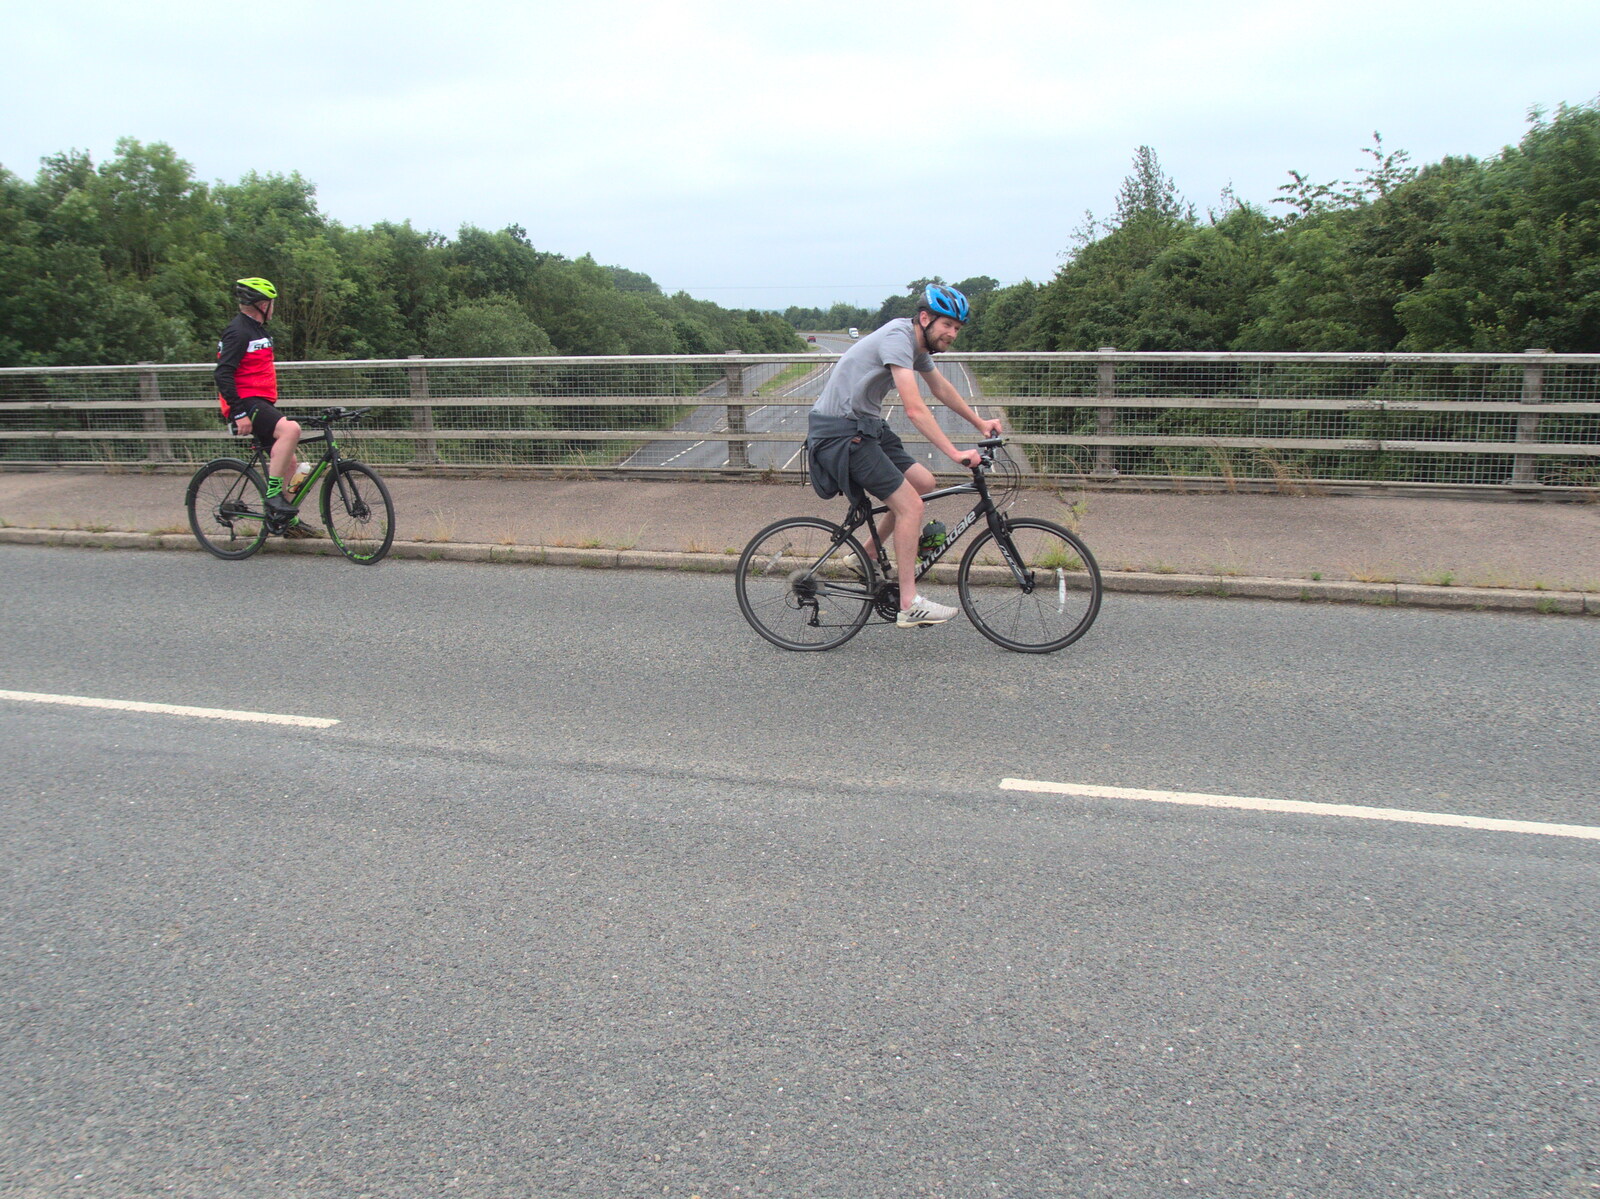 Gaz and The Boy Phil on the bridge from A BSCC Ride to Pulham Market, Norfolk - 17th June 2021